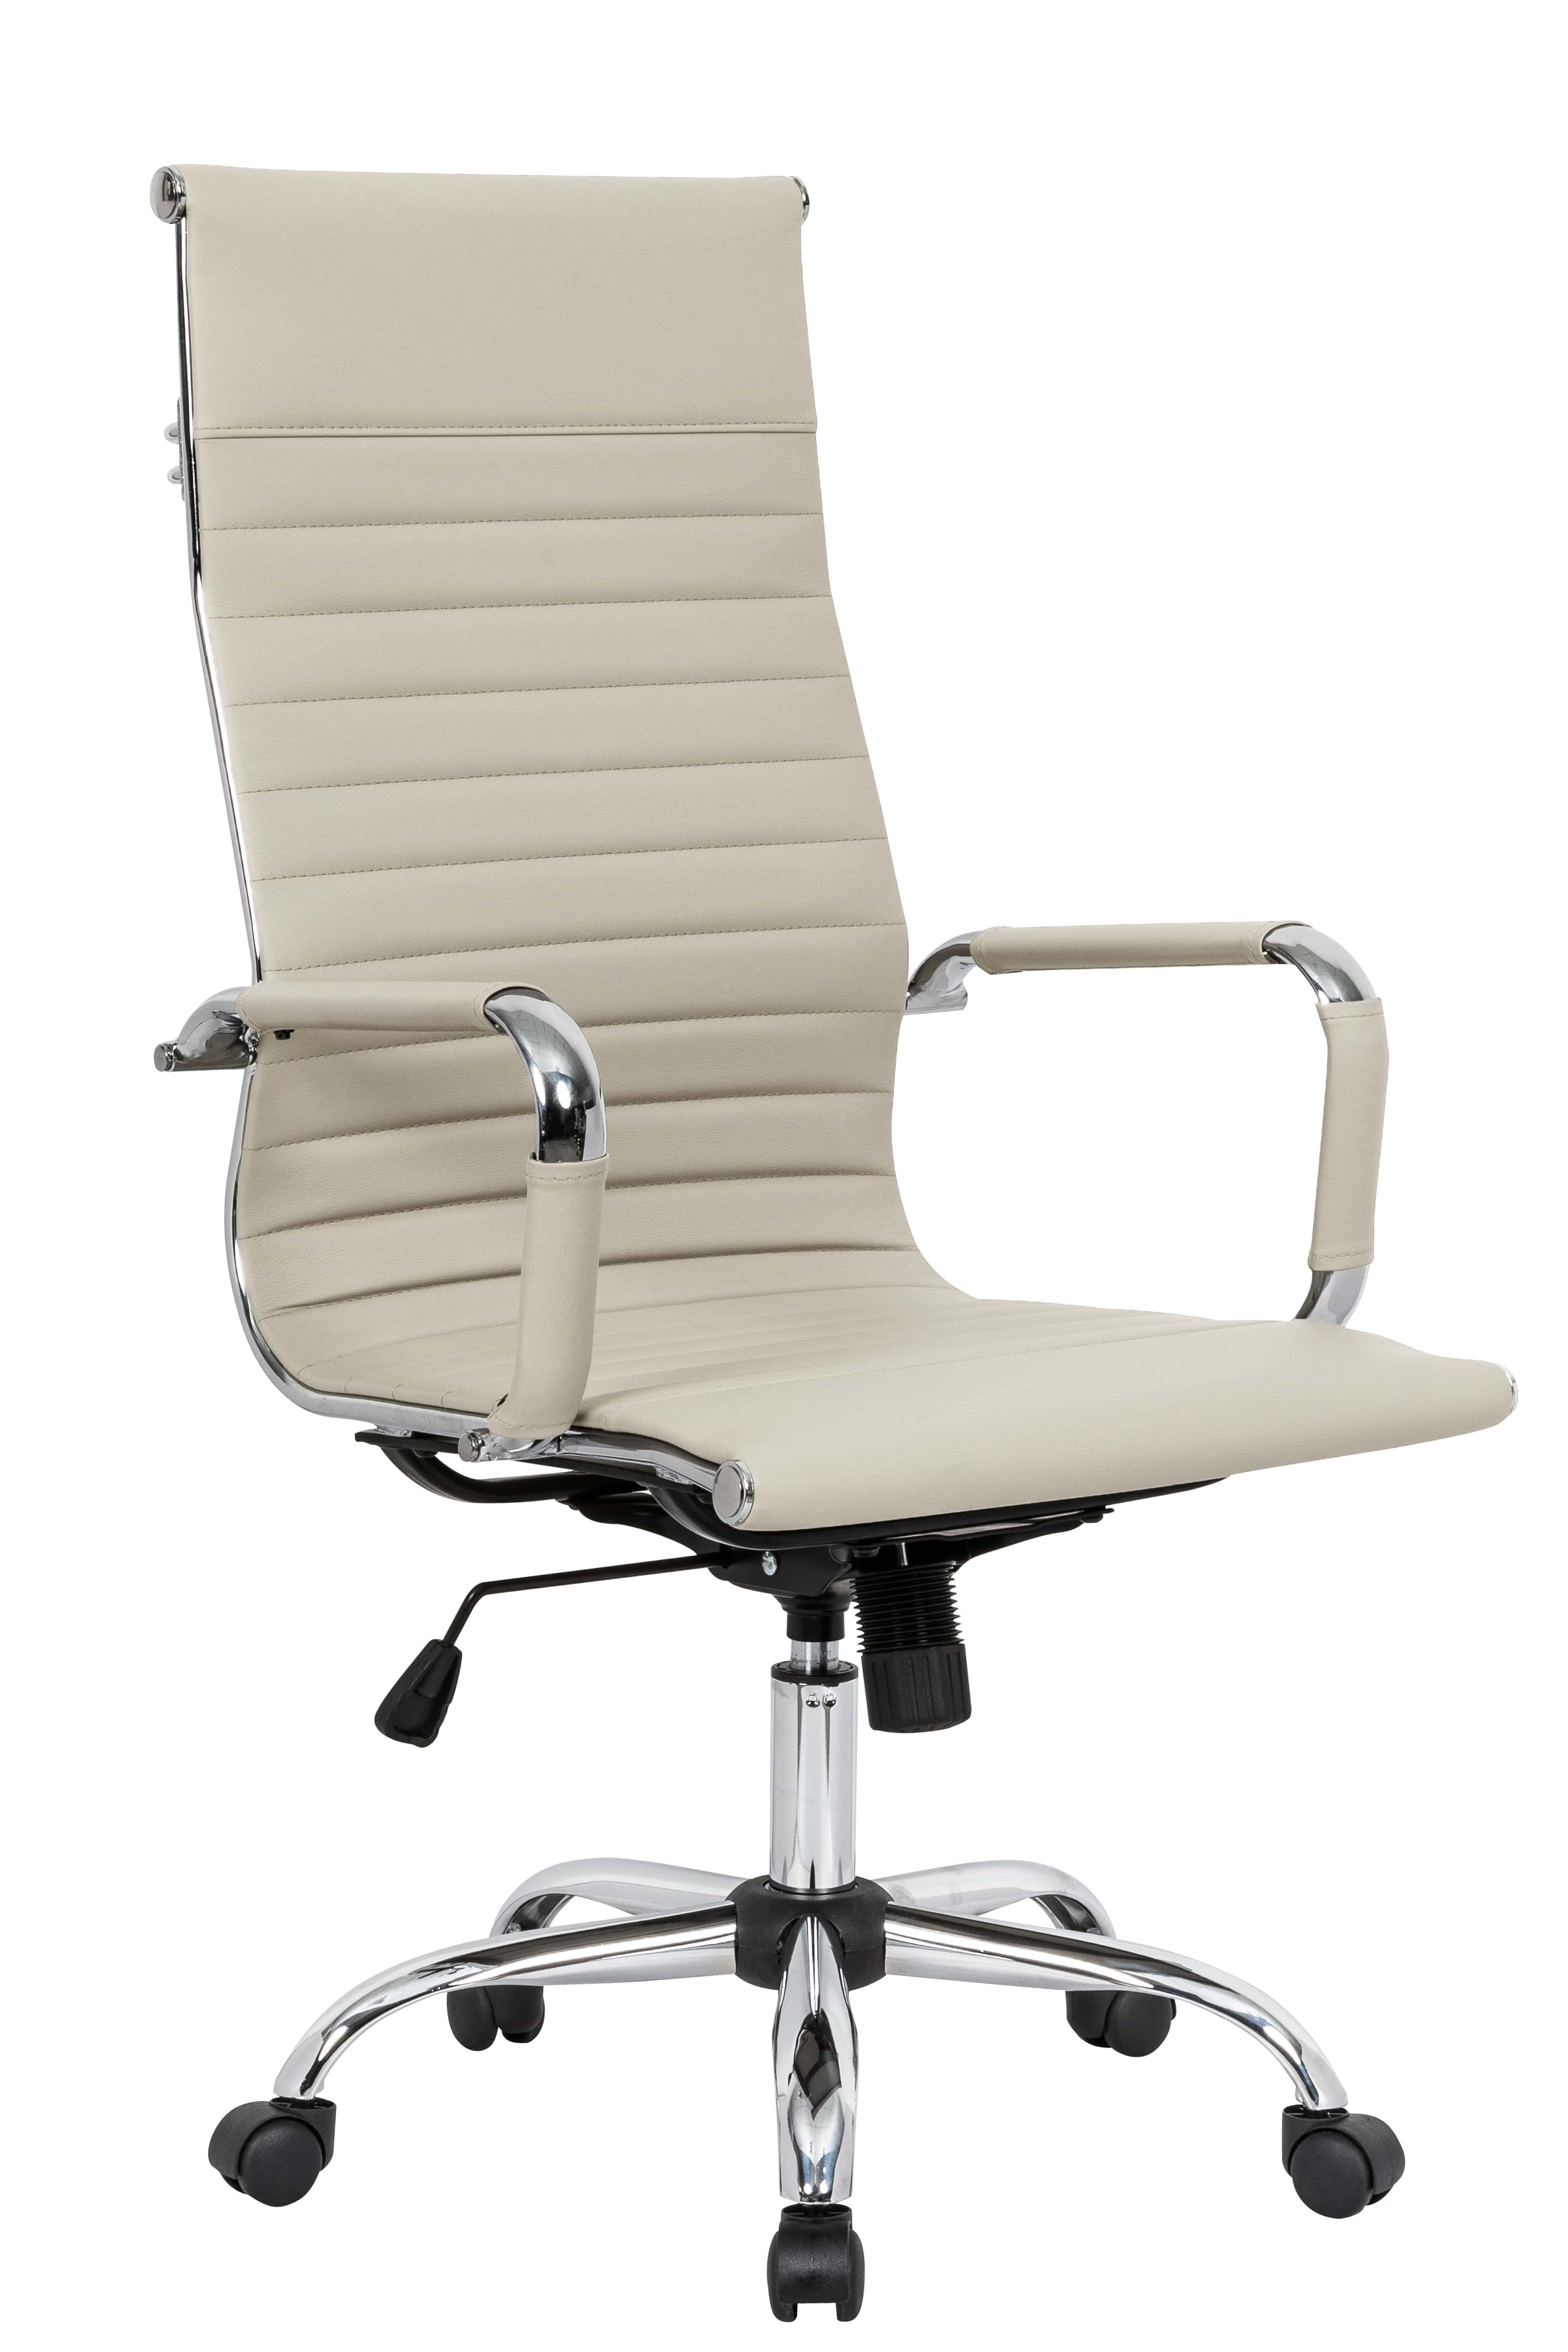 Harris Tan High-Back Ribbed Design Leatherette Office Chair by LeisureMod